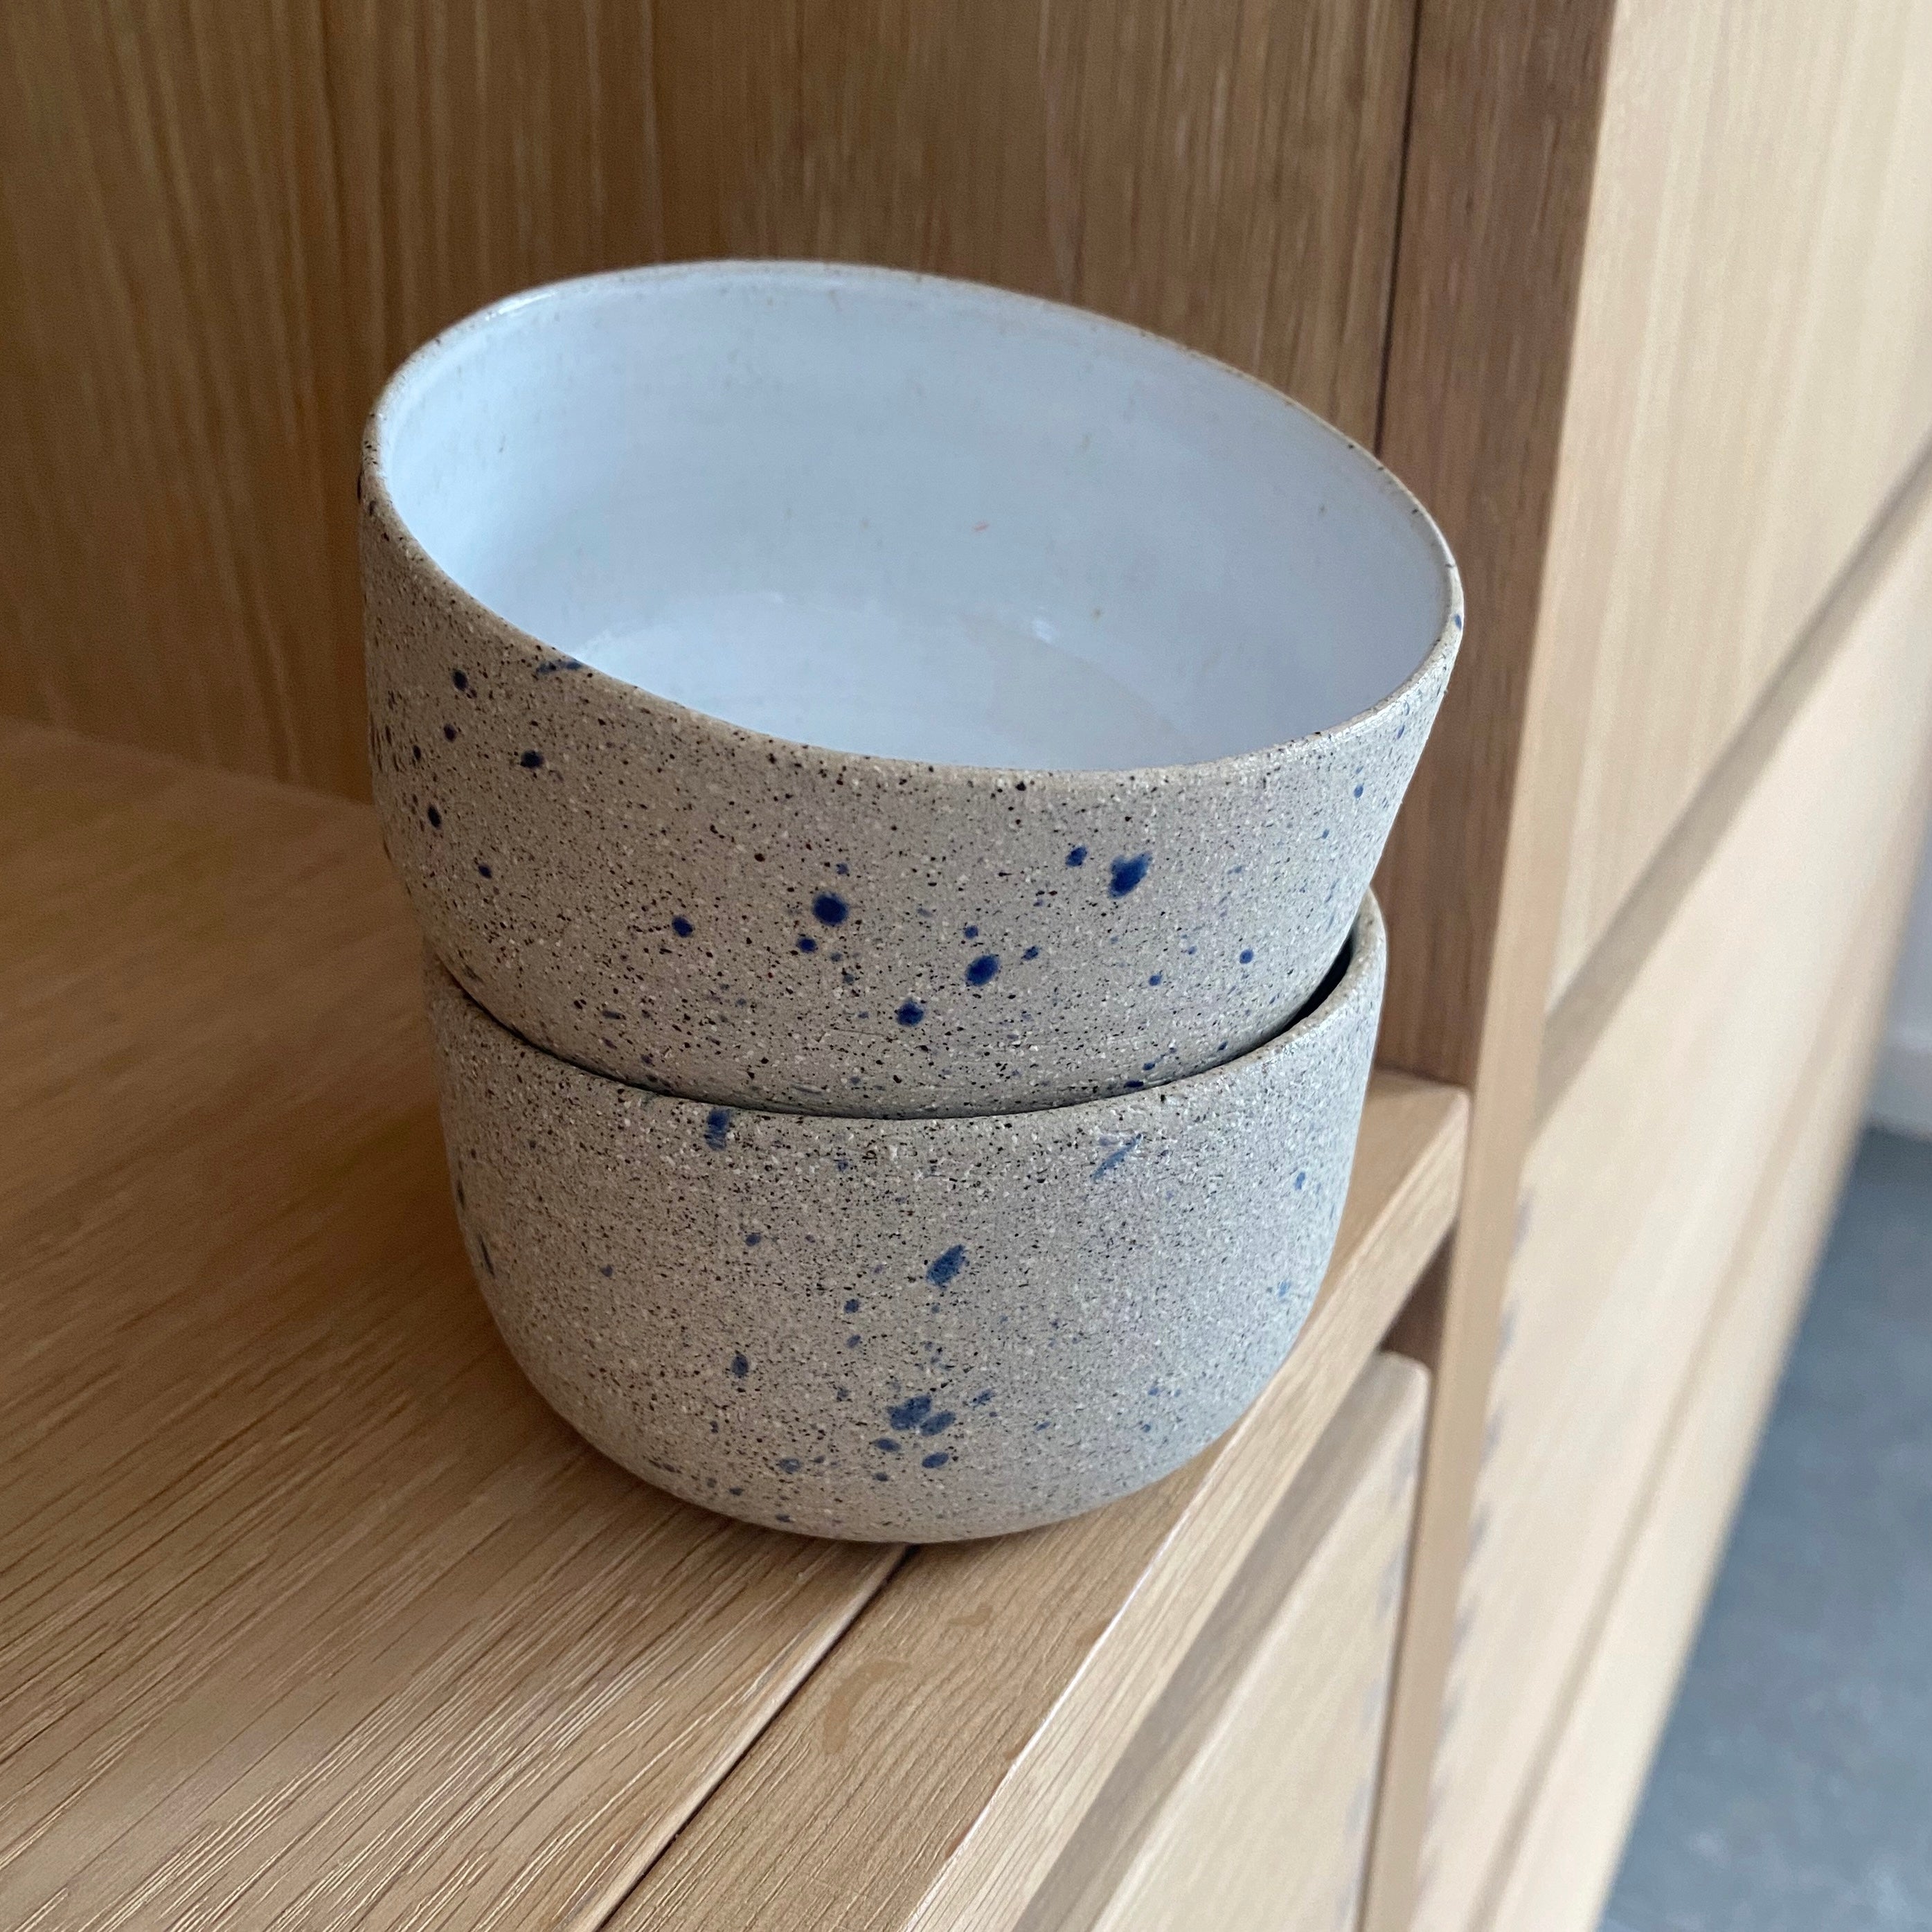 Tasja P bowl Mirabelle - Sand colored with blue sparkles